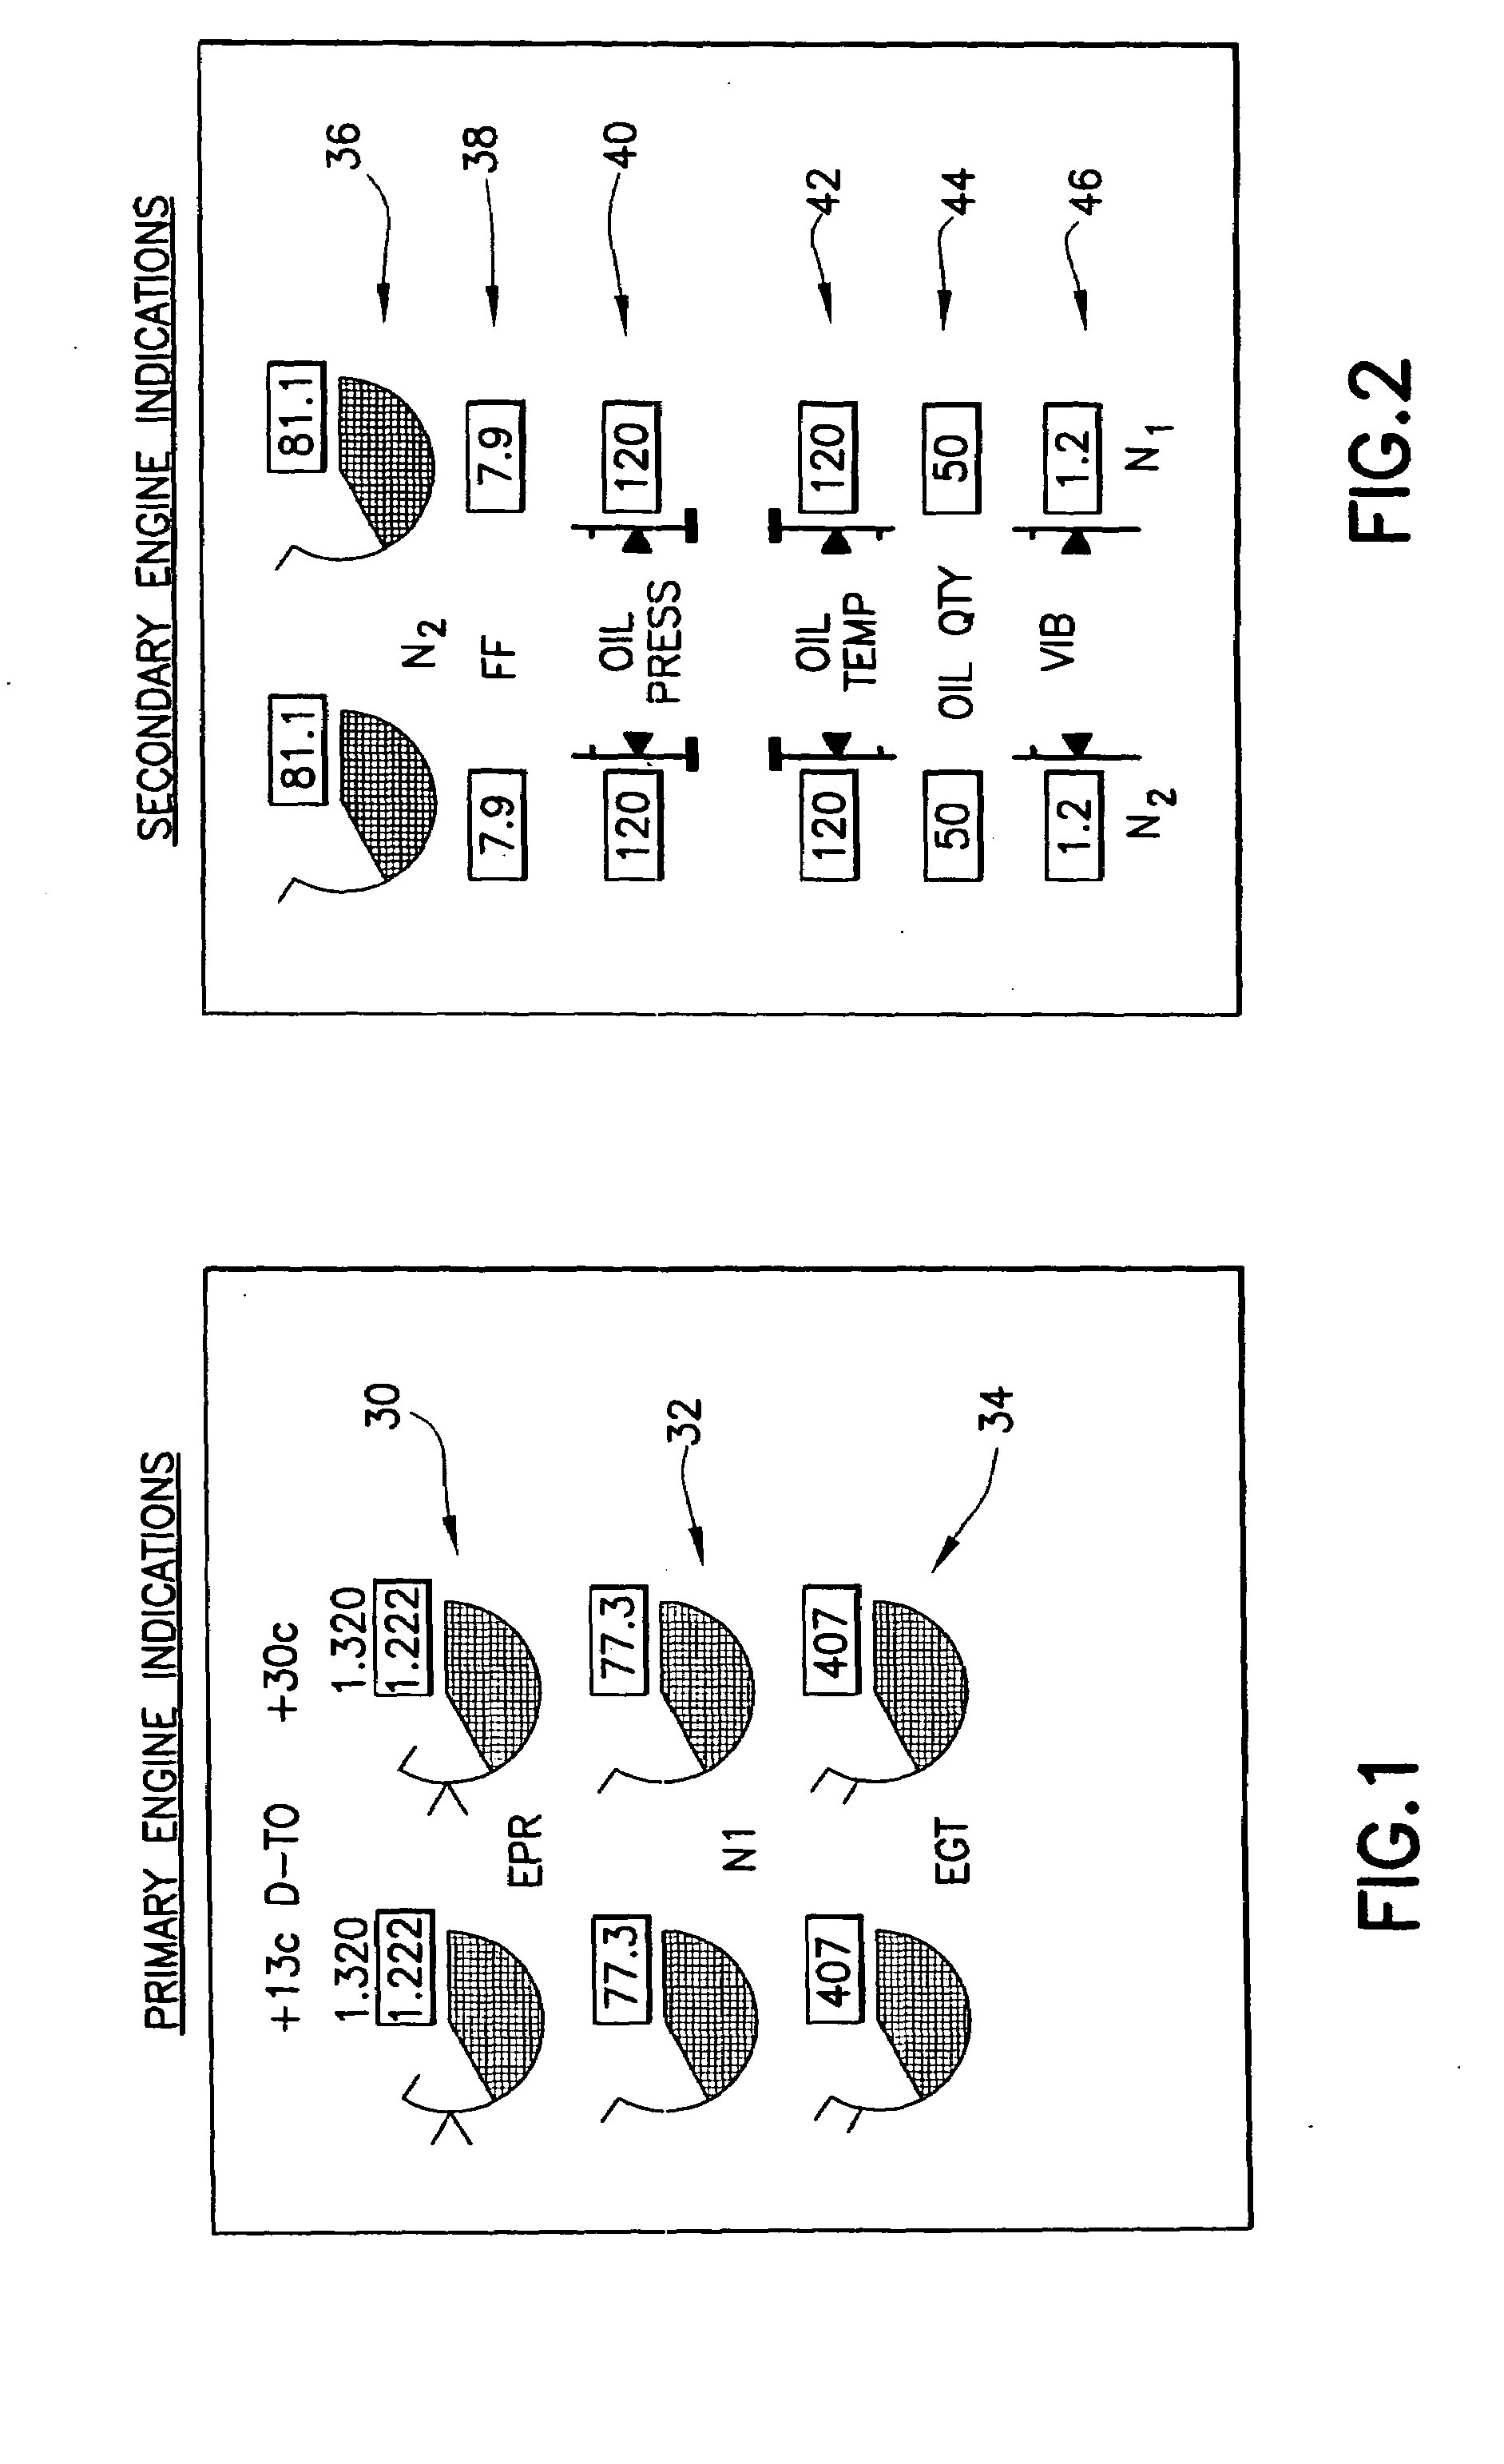 Method and apparatus for indicating operational state of aircraft engine